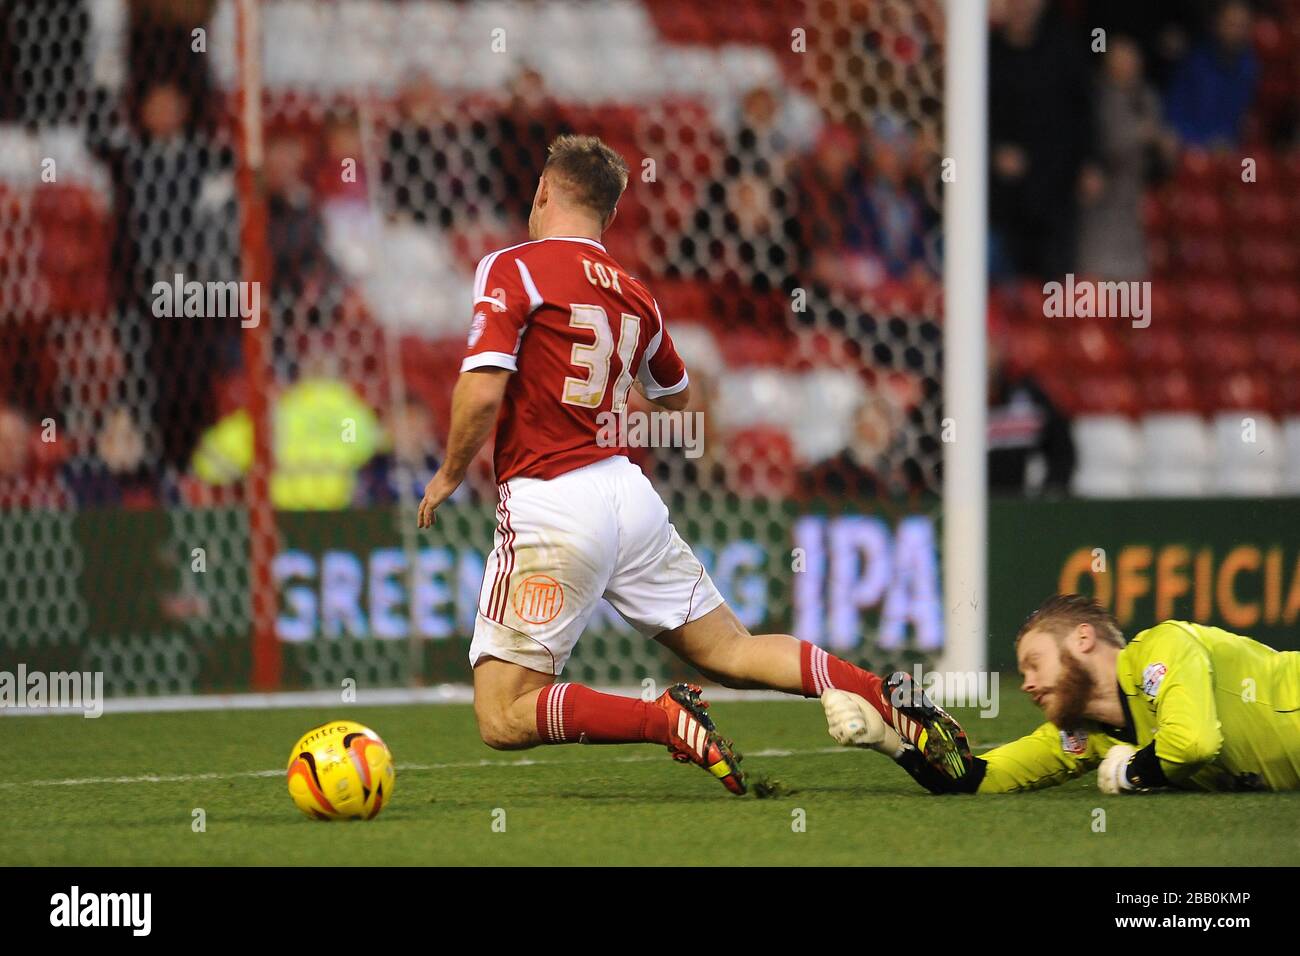 Nottingham Forest's Simon Cox is brough down in the penalty area by Ipswich Town goalkeeper Dean Gerken Stock Photo